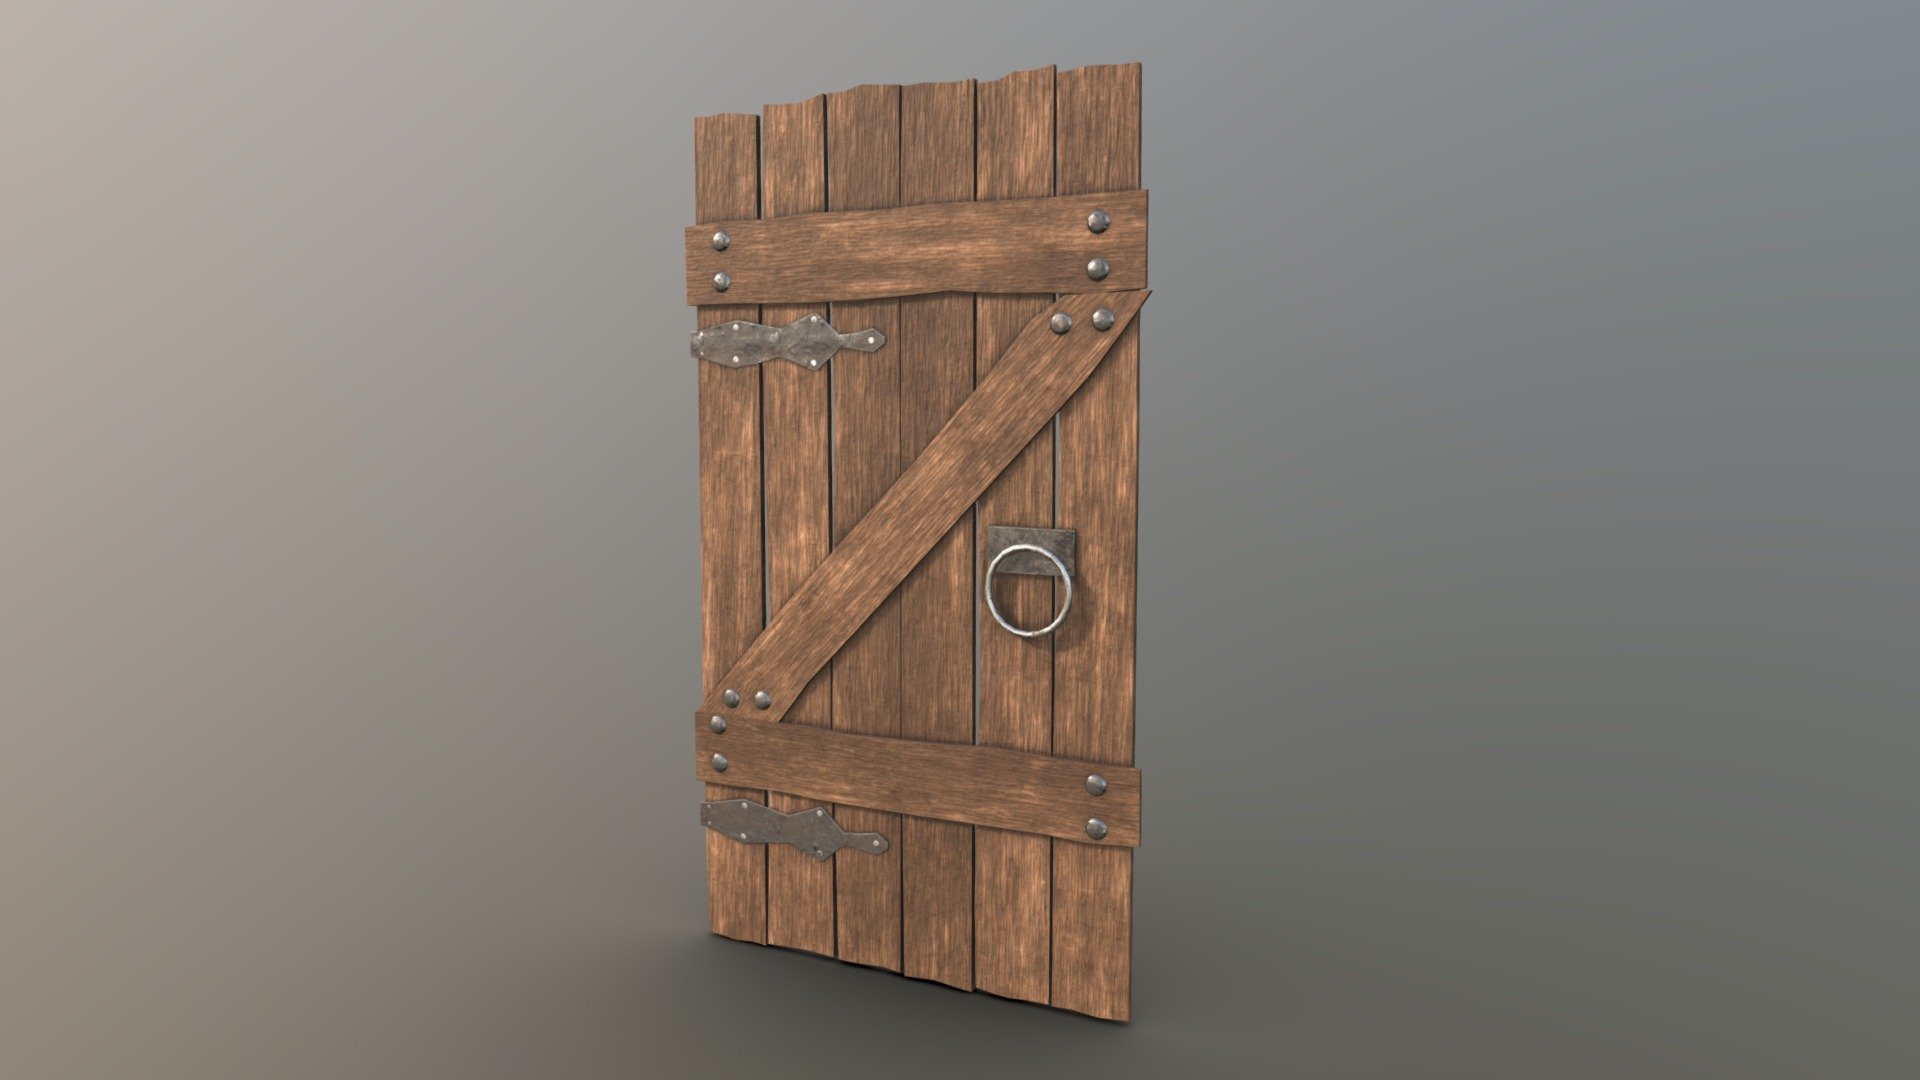 Medieval Wood Door. Ready to be used in game engines like Unity and Unreal Engine.

Modeling on Maya and textured in Substance Painter.

Faces: 3224

Vertices: 3170

Tris: 6160

Textures Resolution: 2048x2048 - Wood Door - 3D model by AndersonJuniorCG 3d model